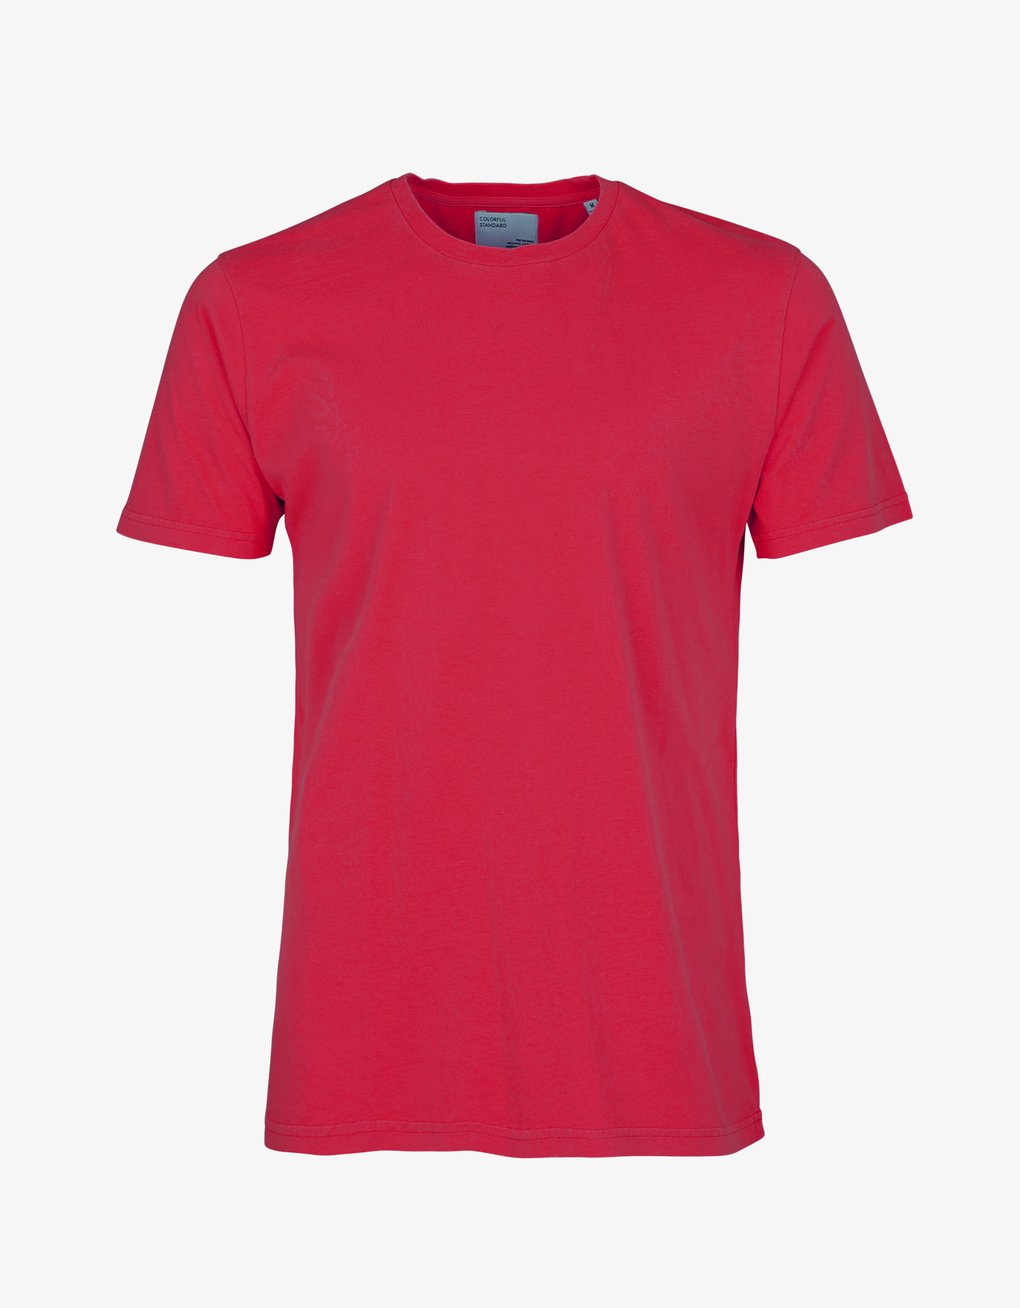 Colorful Standard T-Shirt Scarlet Red - 247 Italia Style